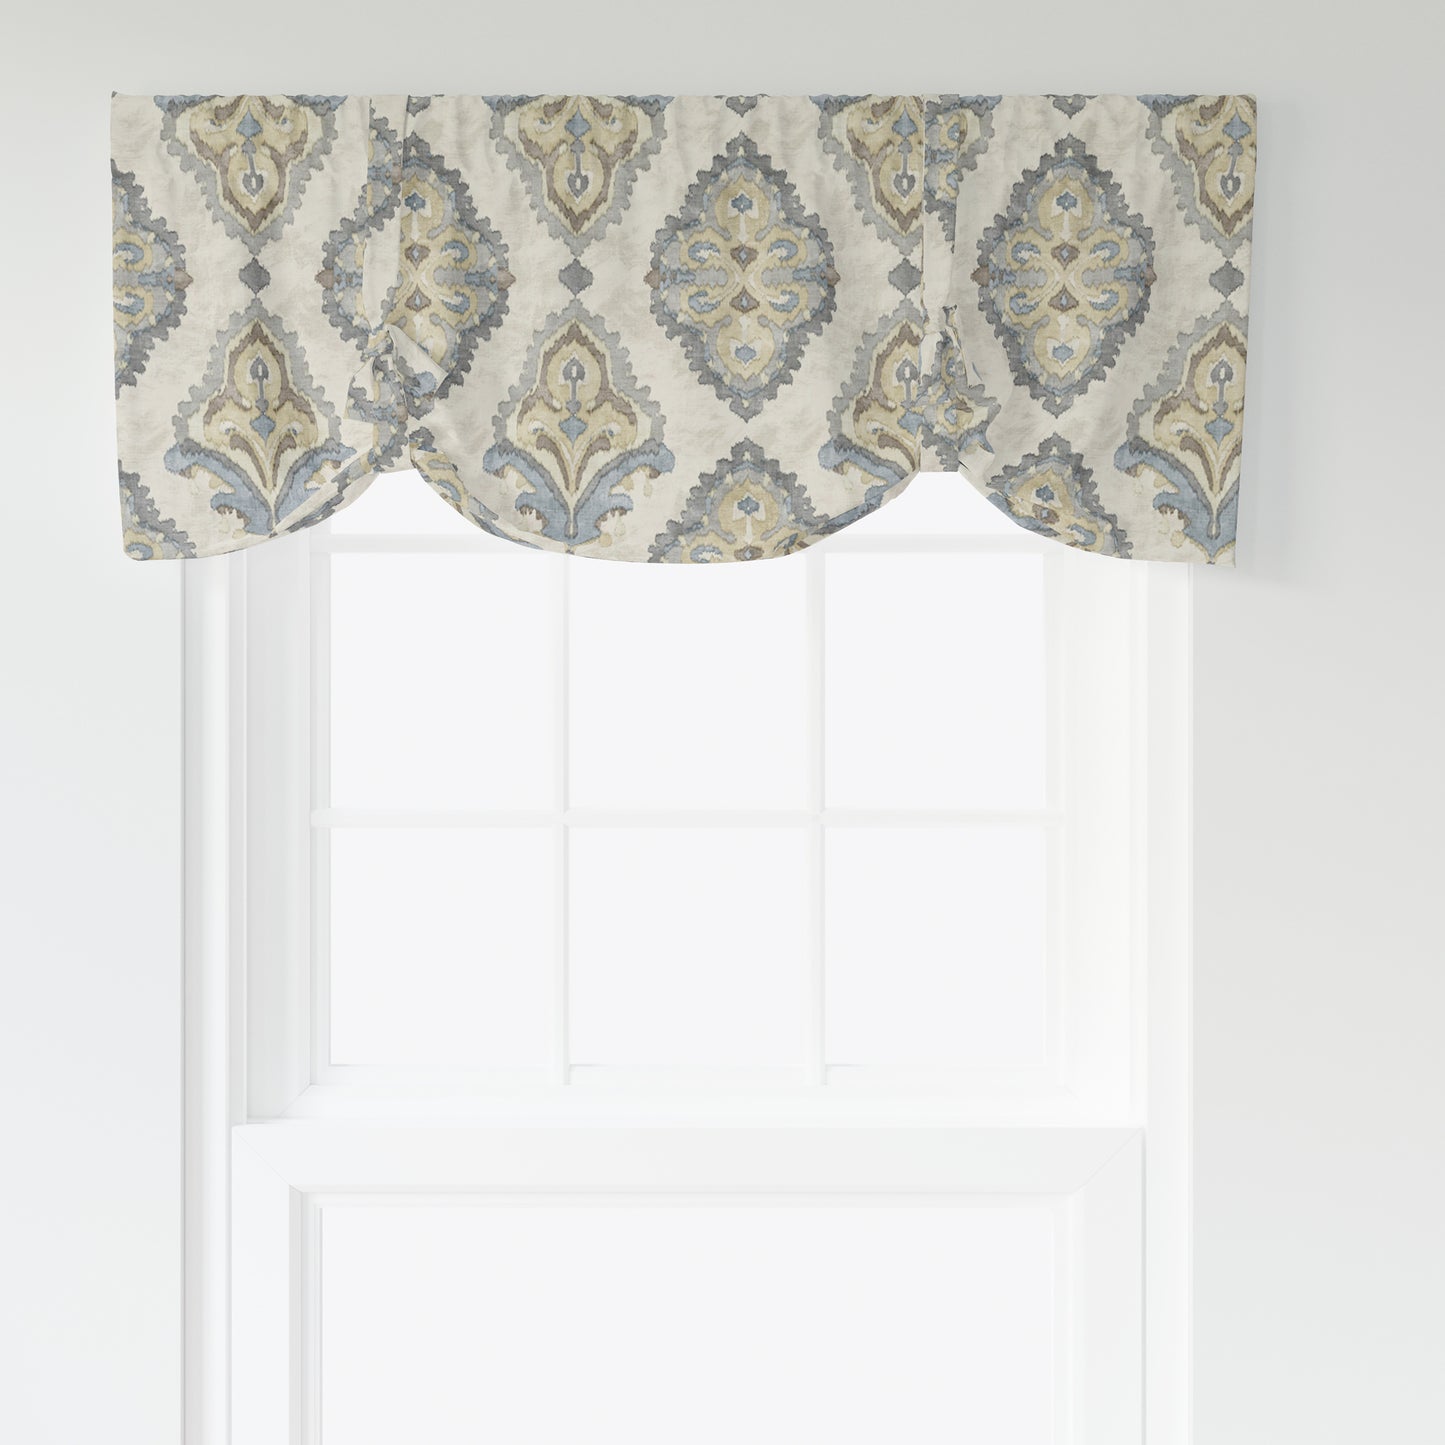 Tie-up Valance in Queen Harbor Blue Medallion Watercolor- Large Scale